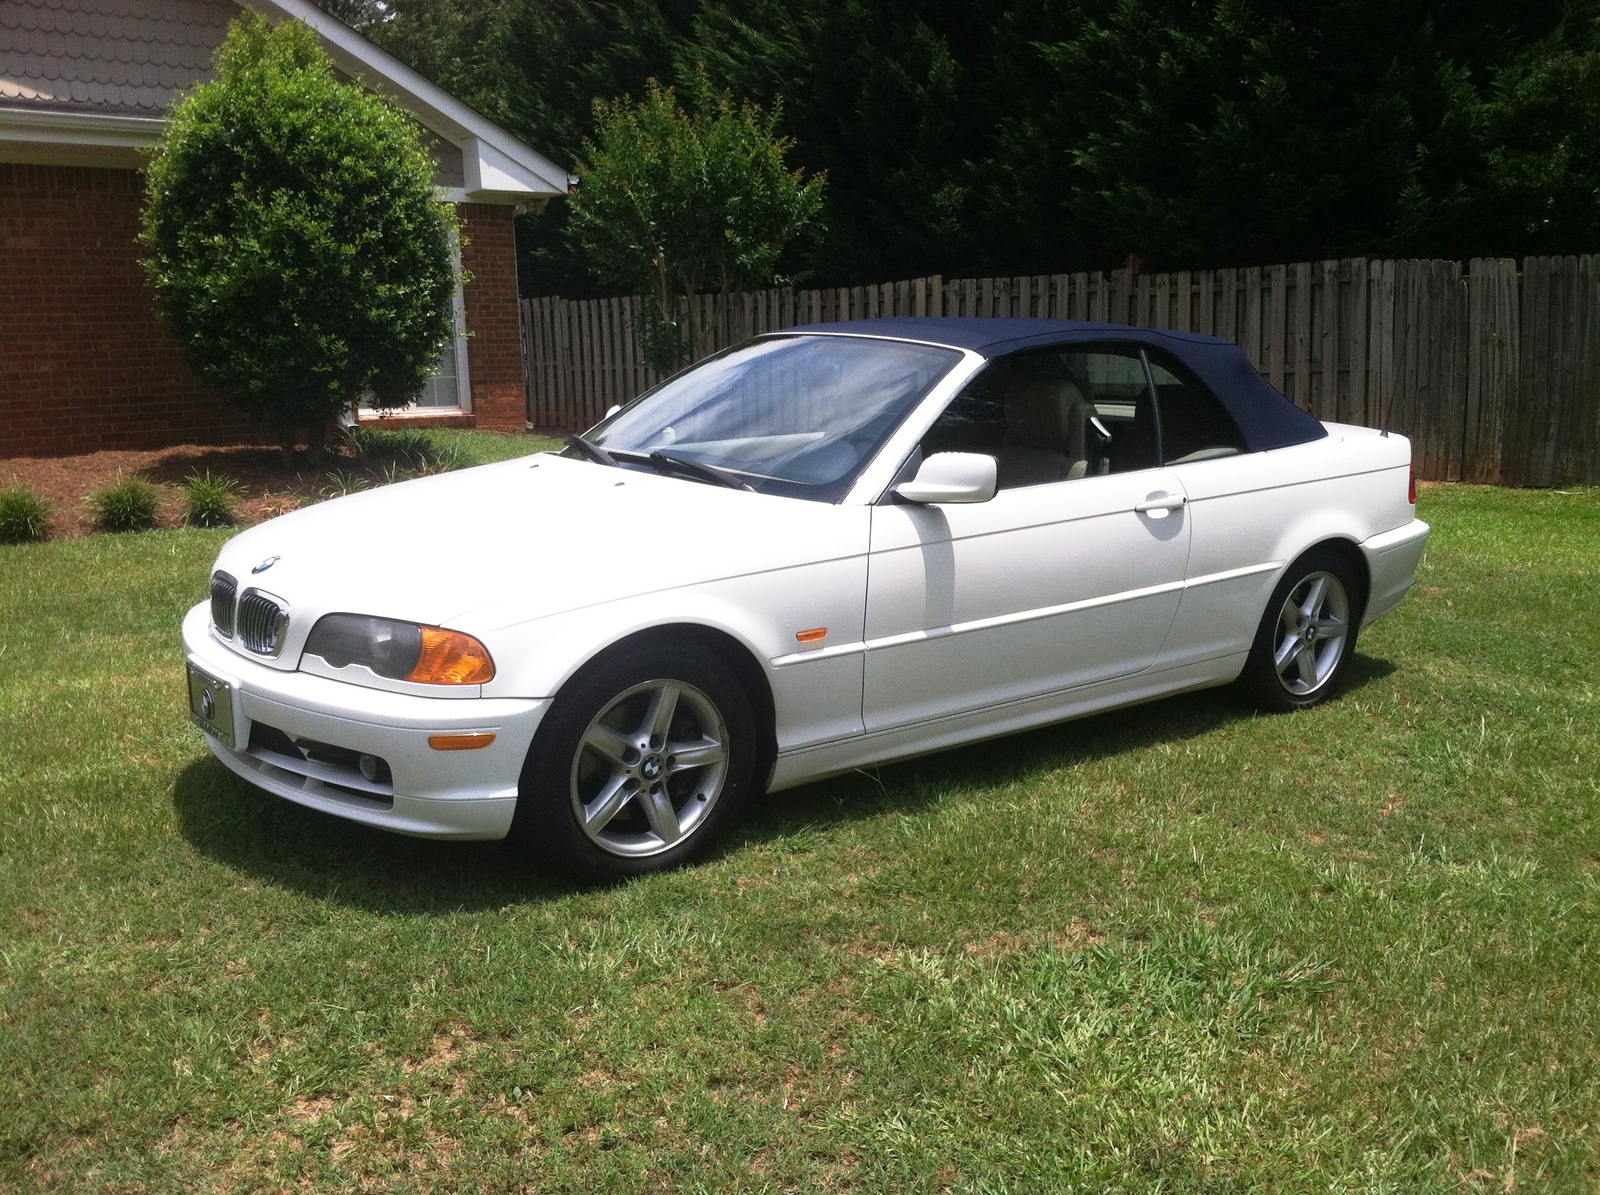 2002 Bmw 325i convertible review #1